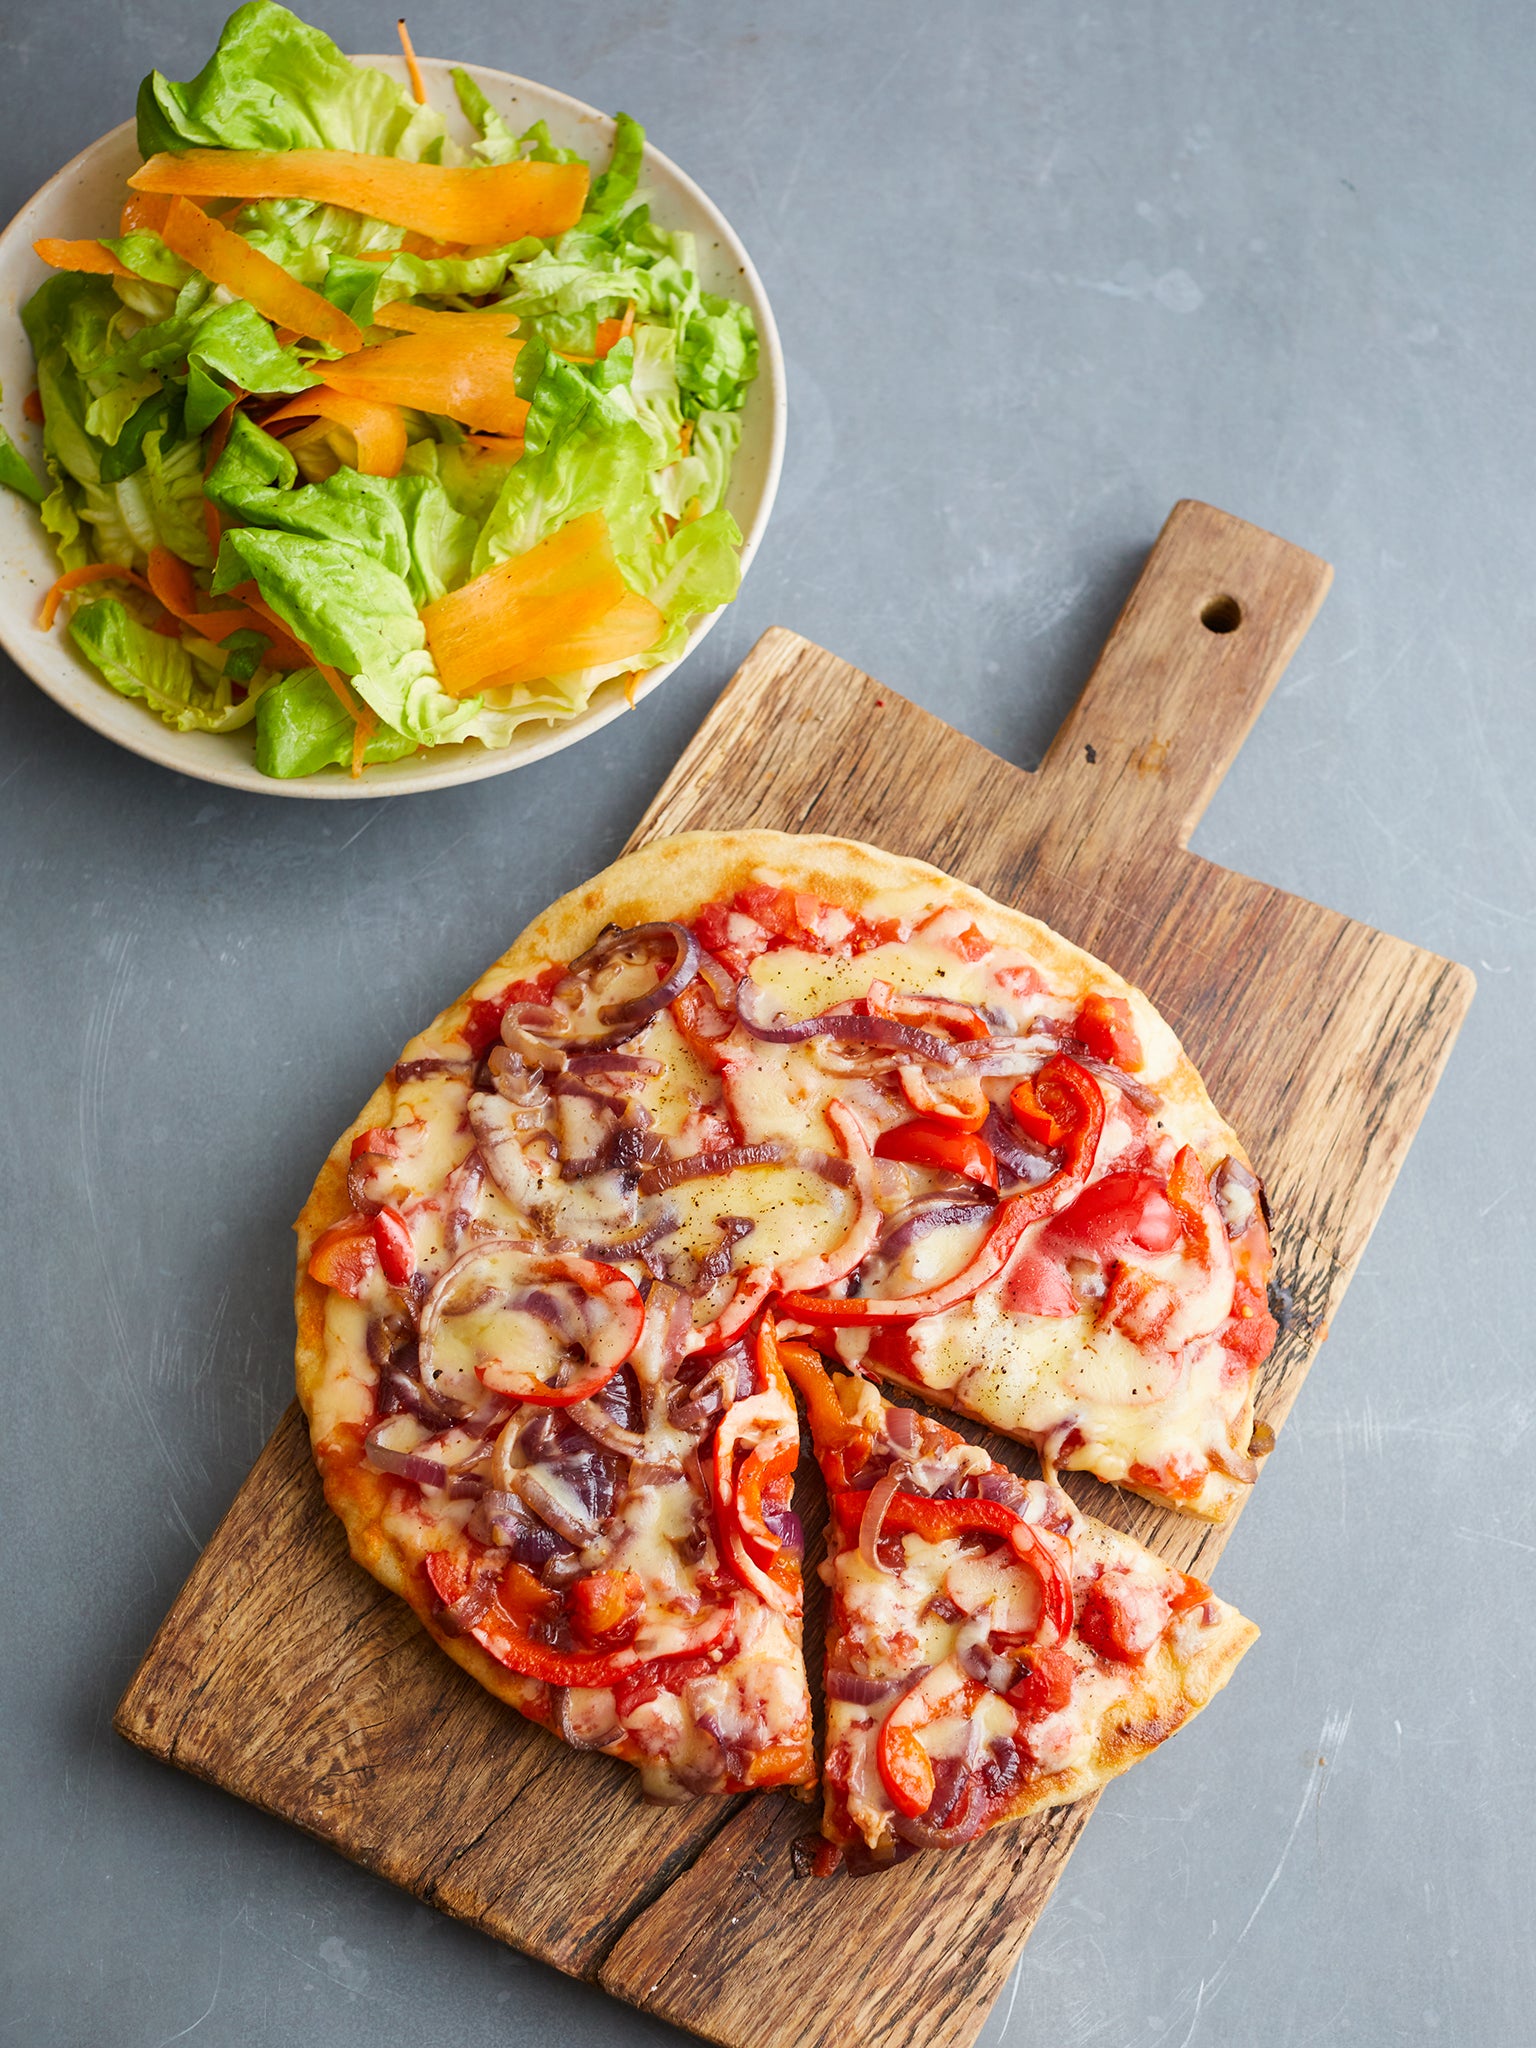 This no-oven pizza is not only quicker than a takeaway, it’s far cheaper and healthier